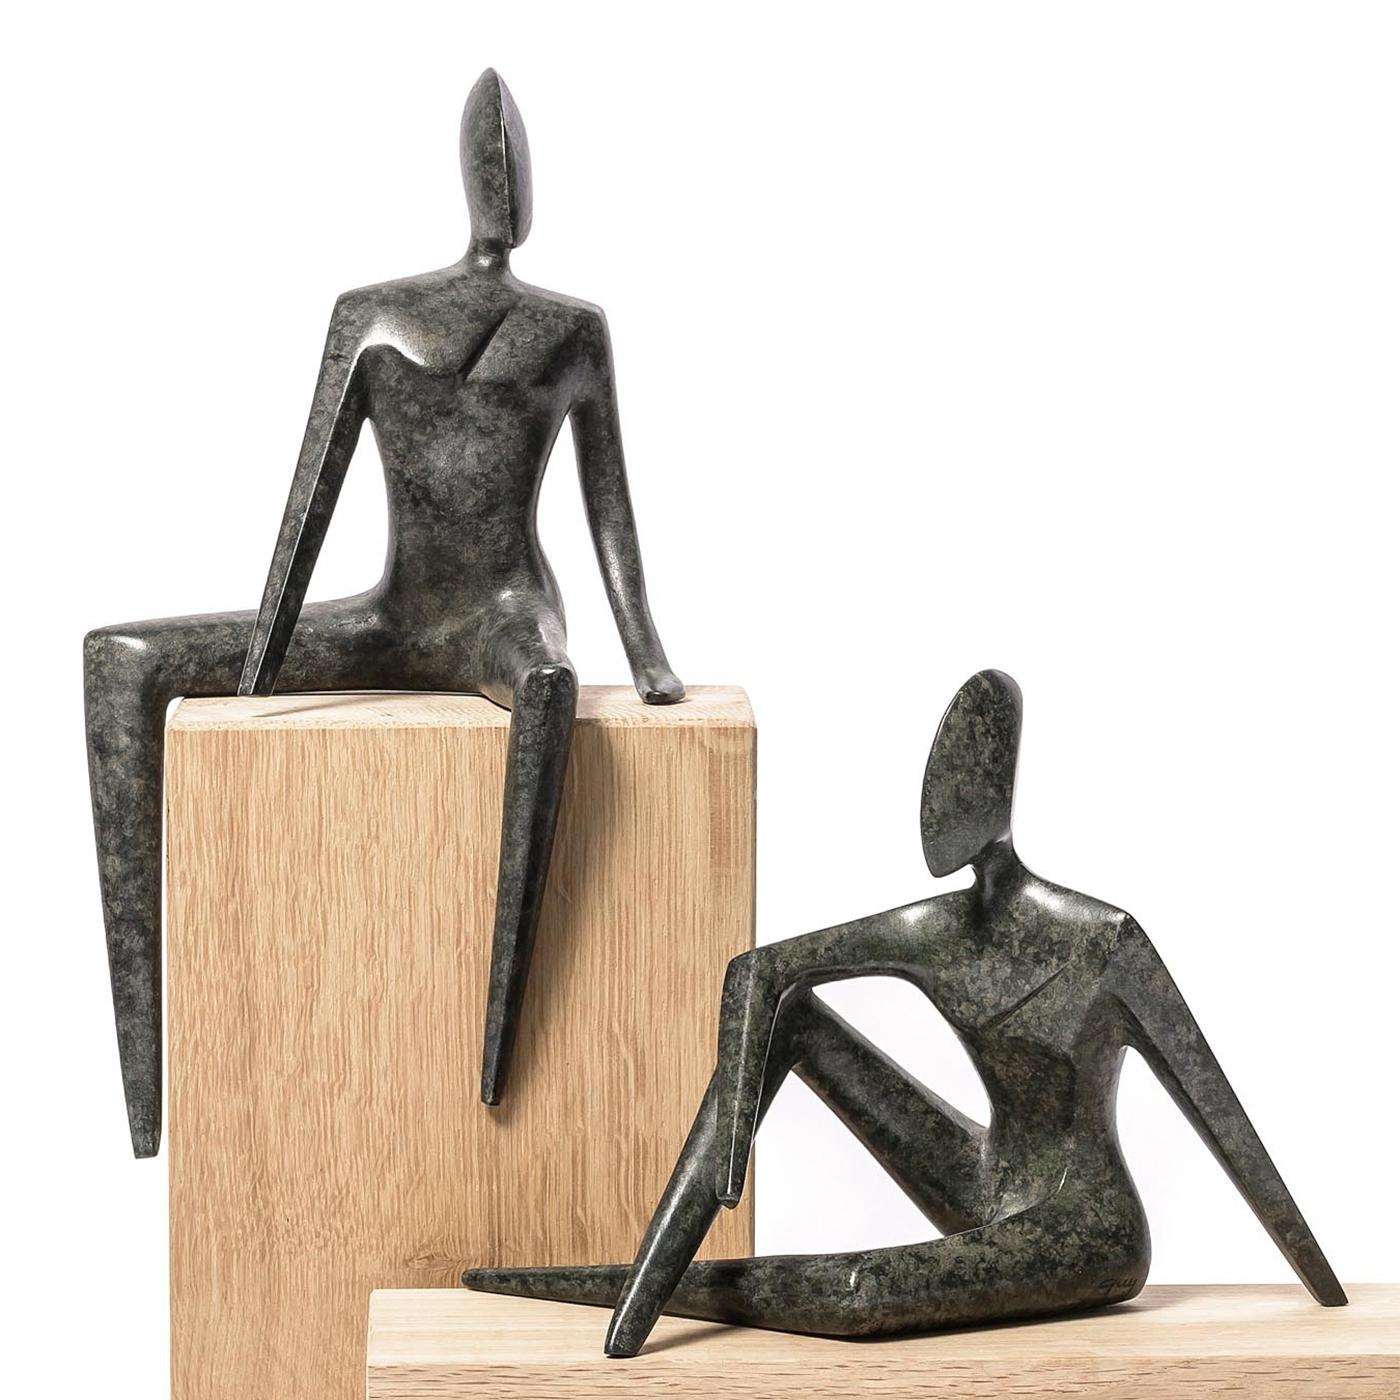 Sculpture Woman and Man Set of 2 all in 
solid bronze in dark green bronze finish.
Woman: L15xD13xH28cm.
Man: L21xD12xH15cm.
Oak wood bases not included.